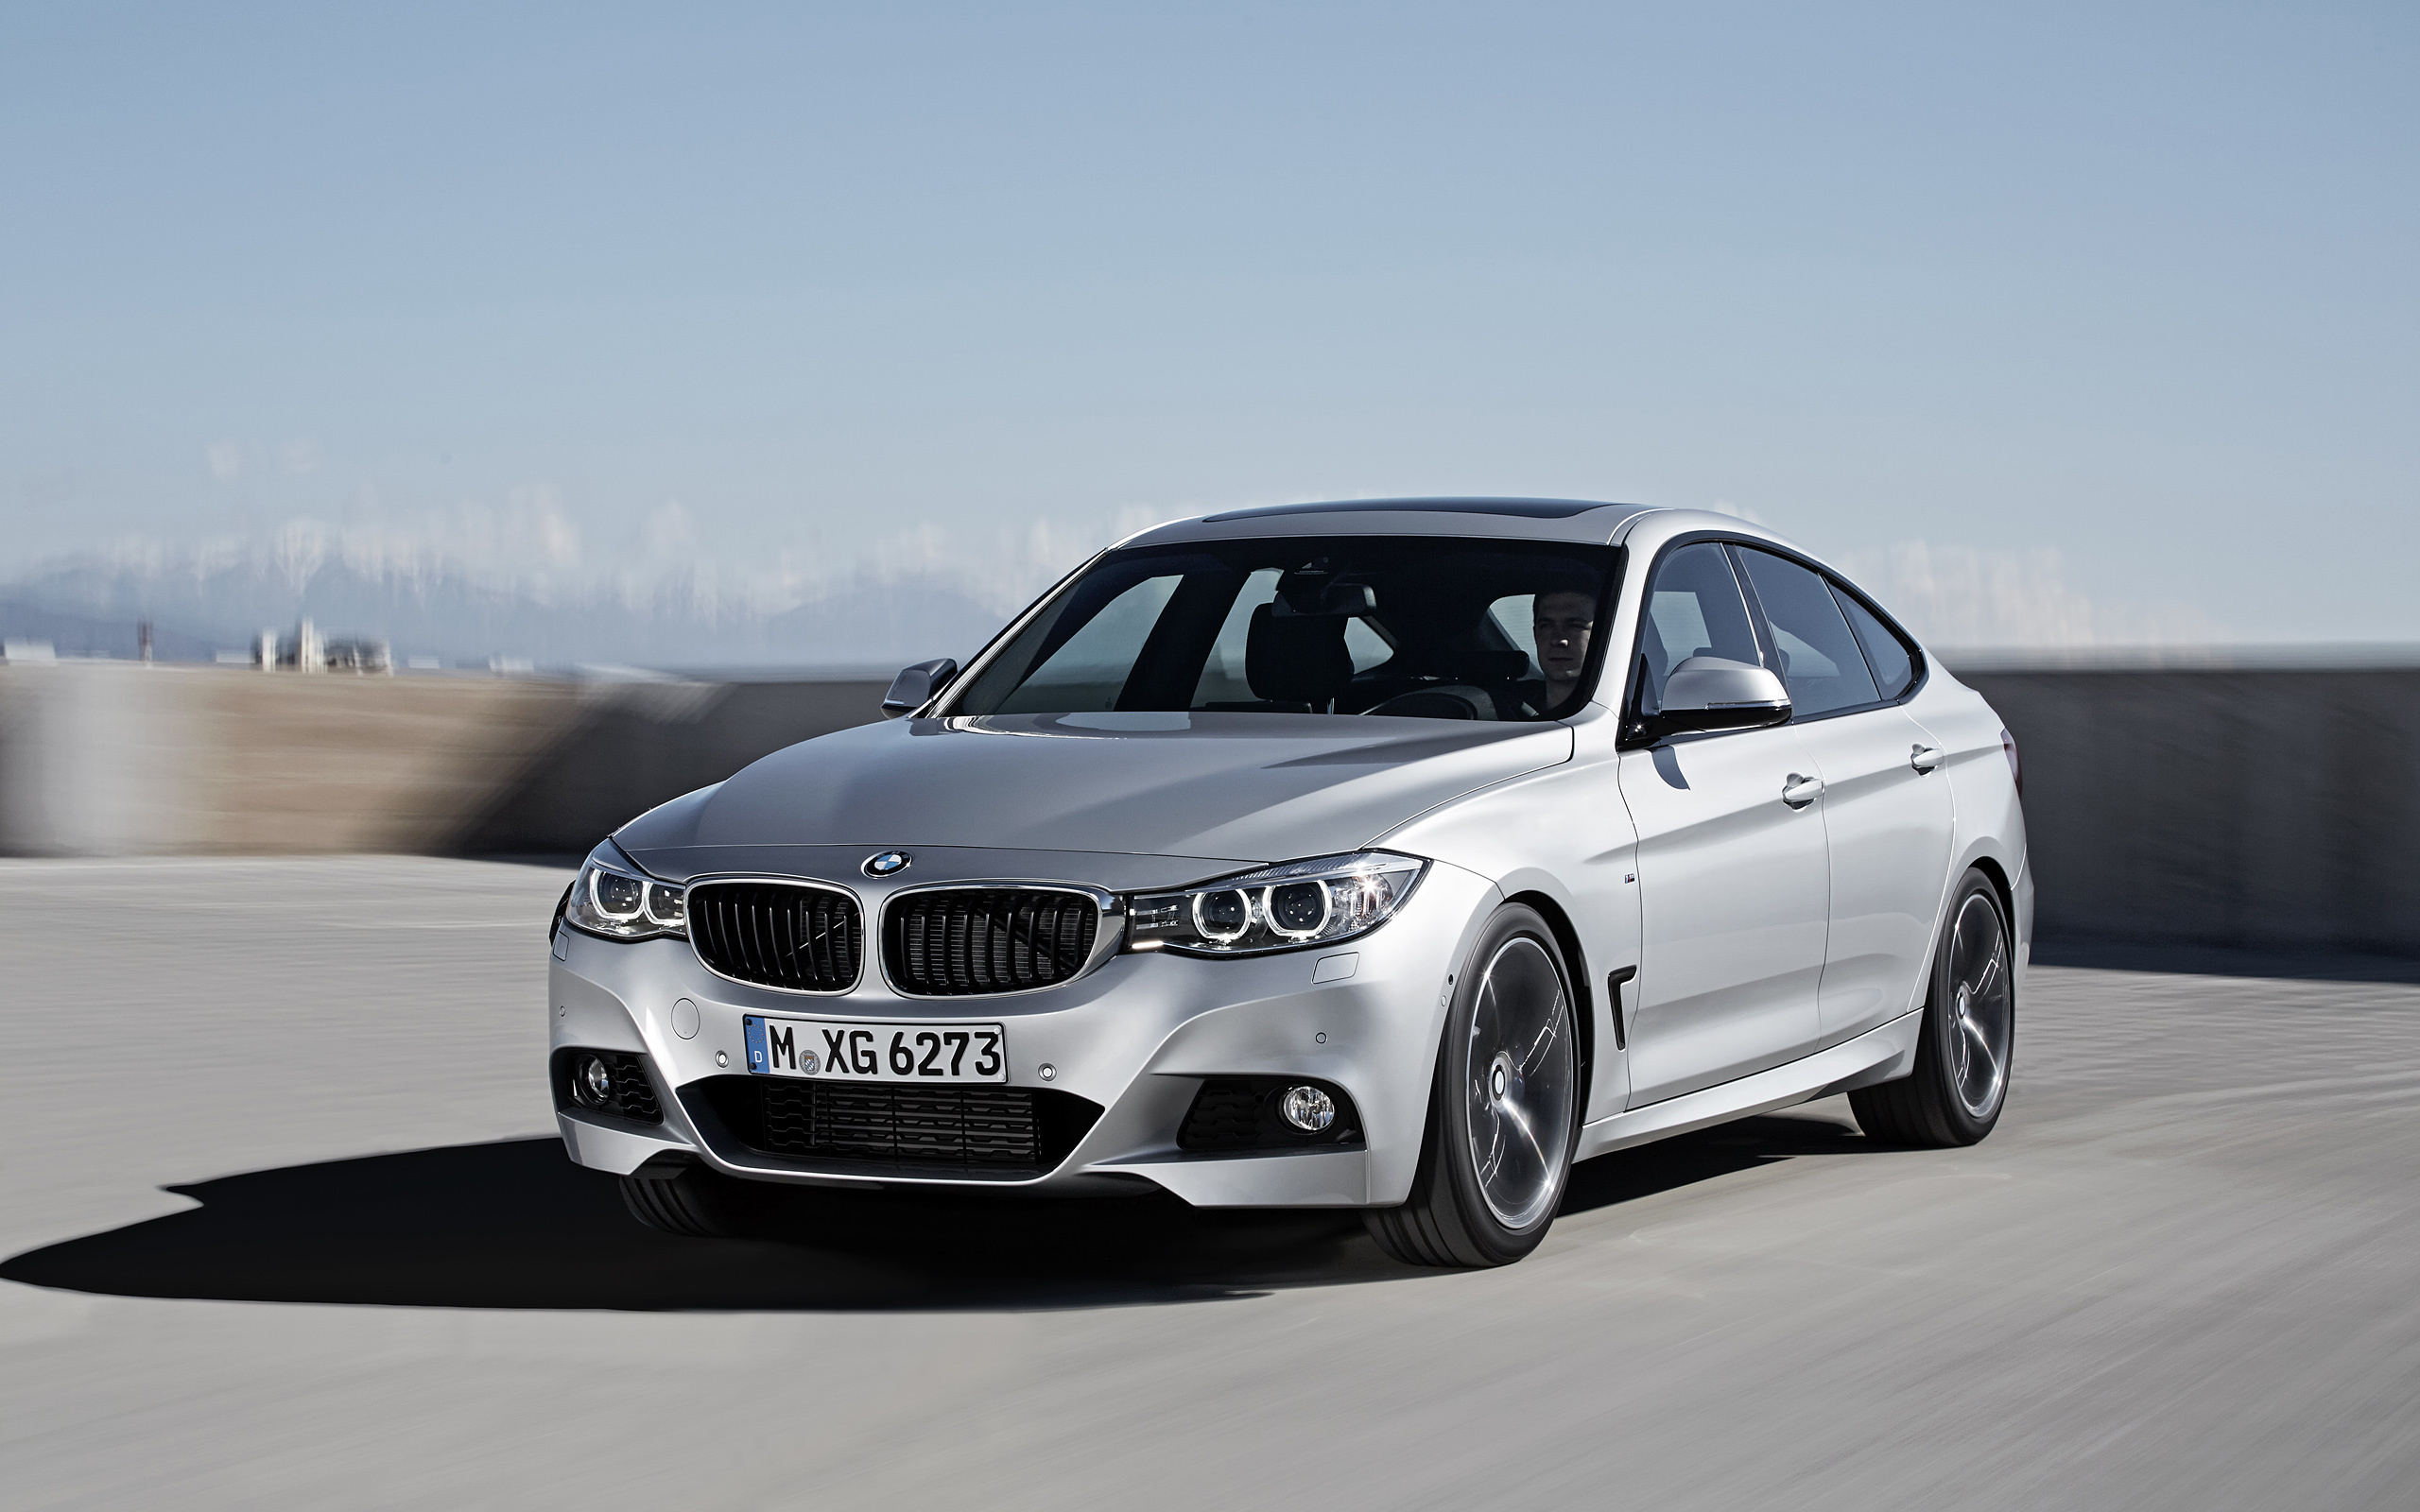 BMW 3 Series, Gran Turismo model, Sleek and sporty, Unforgettable driving experience, 2560x1600 HD Desktop